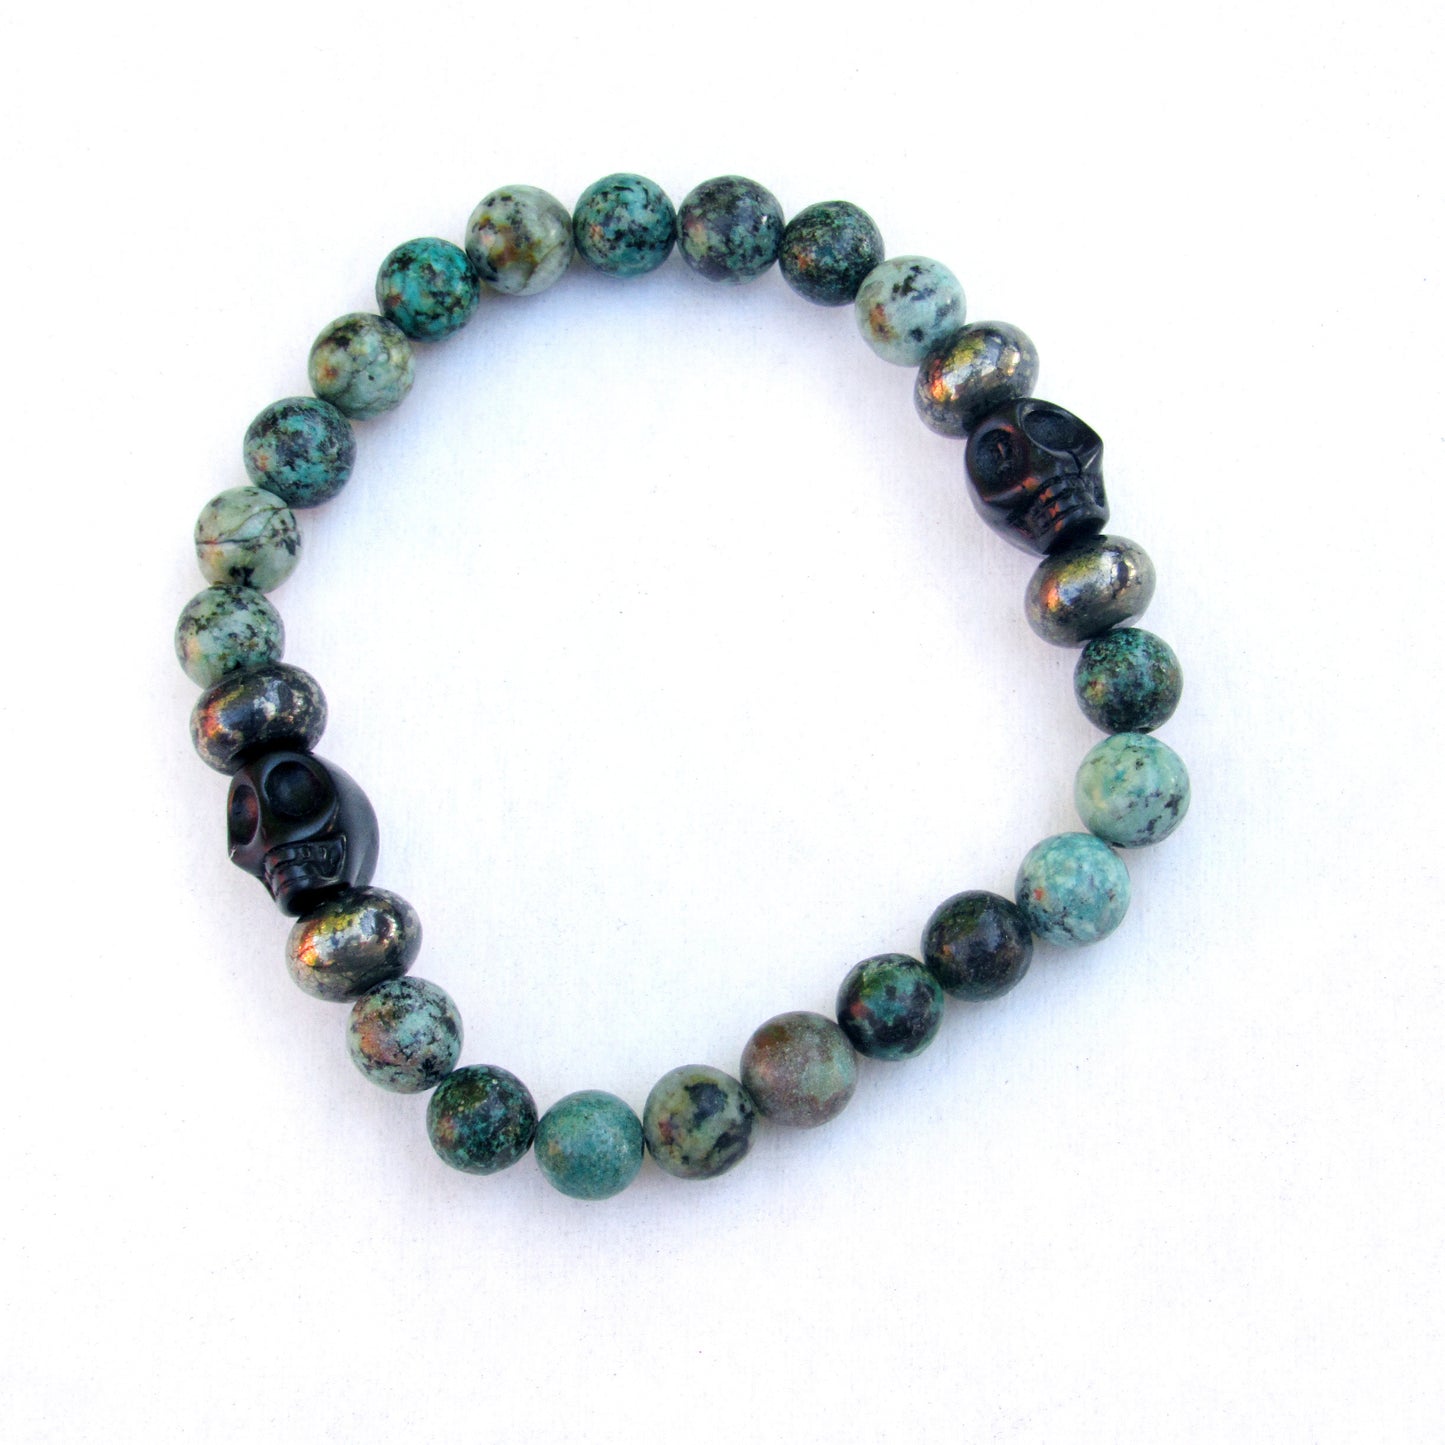 African Turquoise, Pyrite, and Howlite Skull Men’s Stretch Bracelet